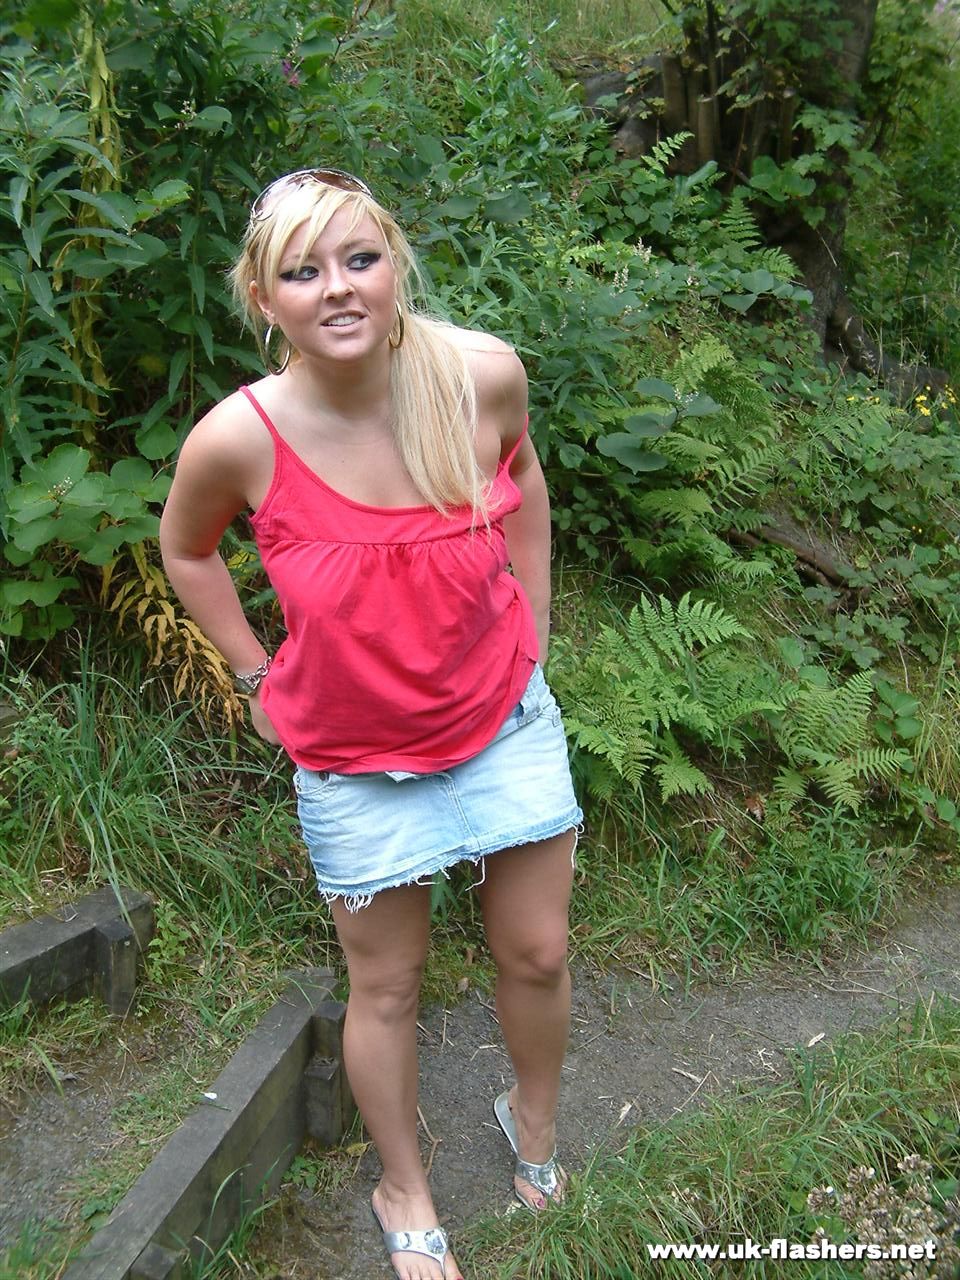 Overweight UK female with blonde hair strips naked on a popular walking trails photo porno #428197328 | UK Flashers Pics, Lena Leigh, Public, porno mobile